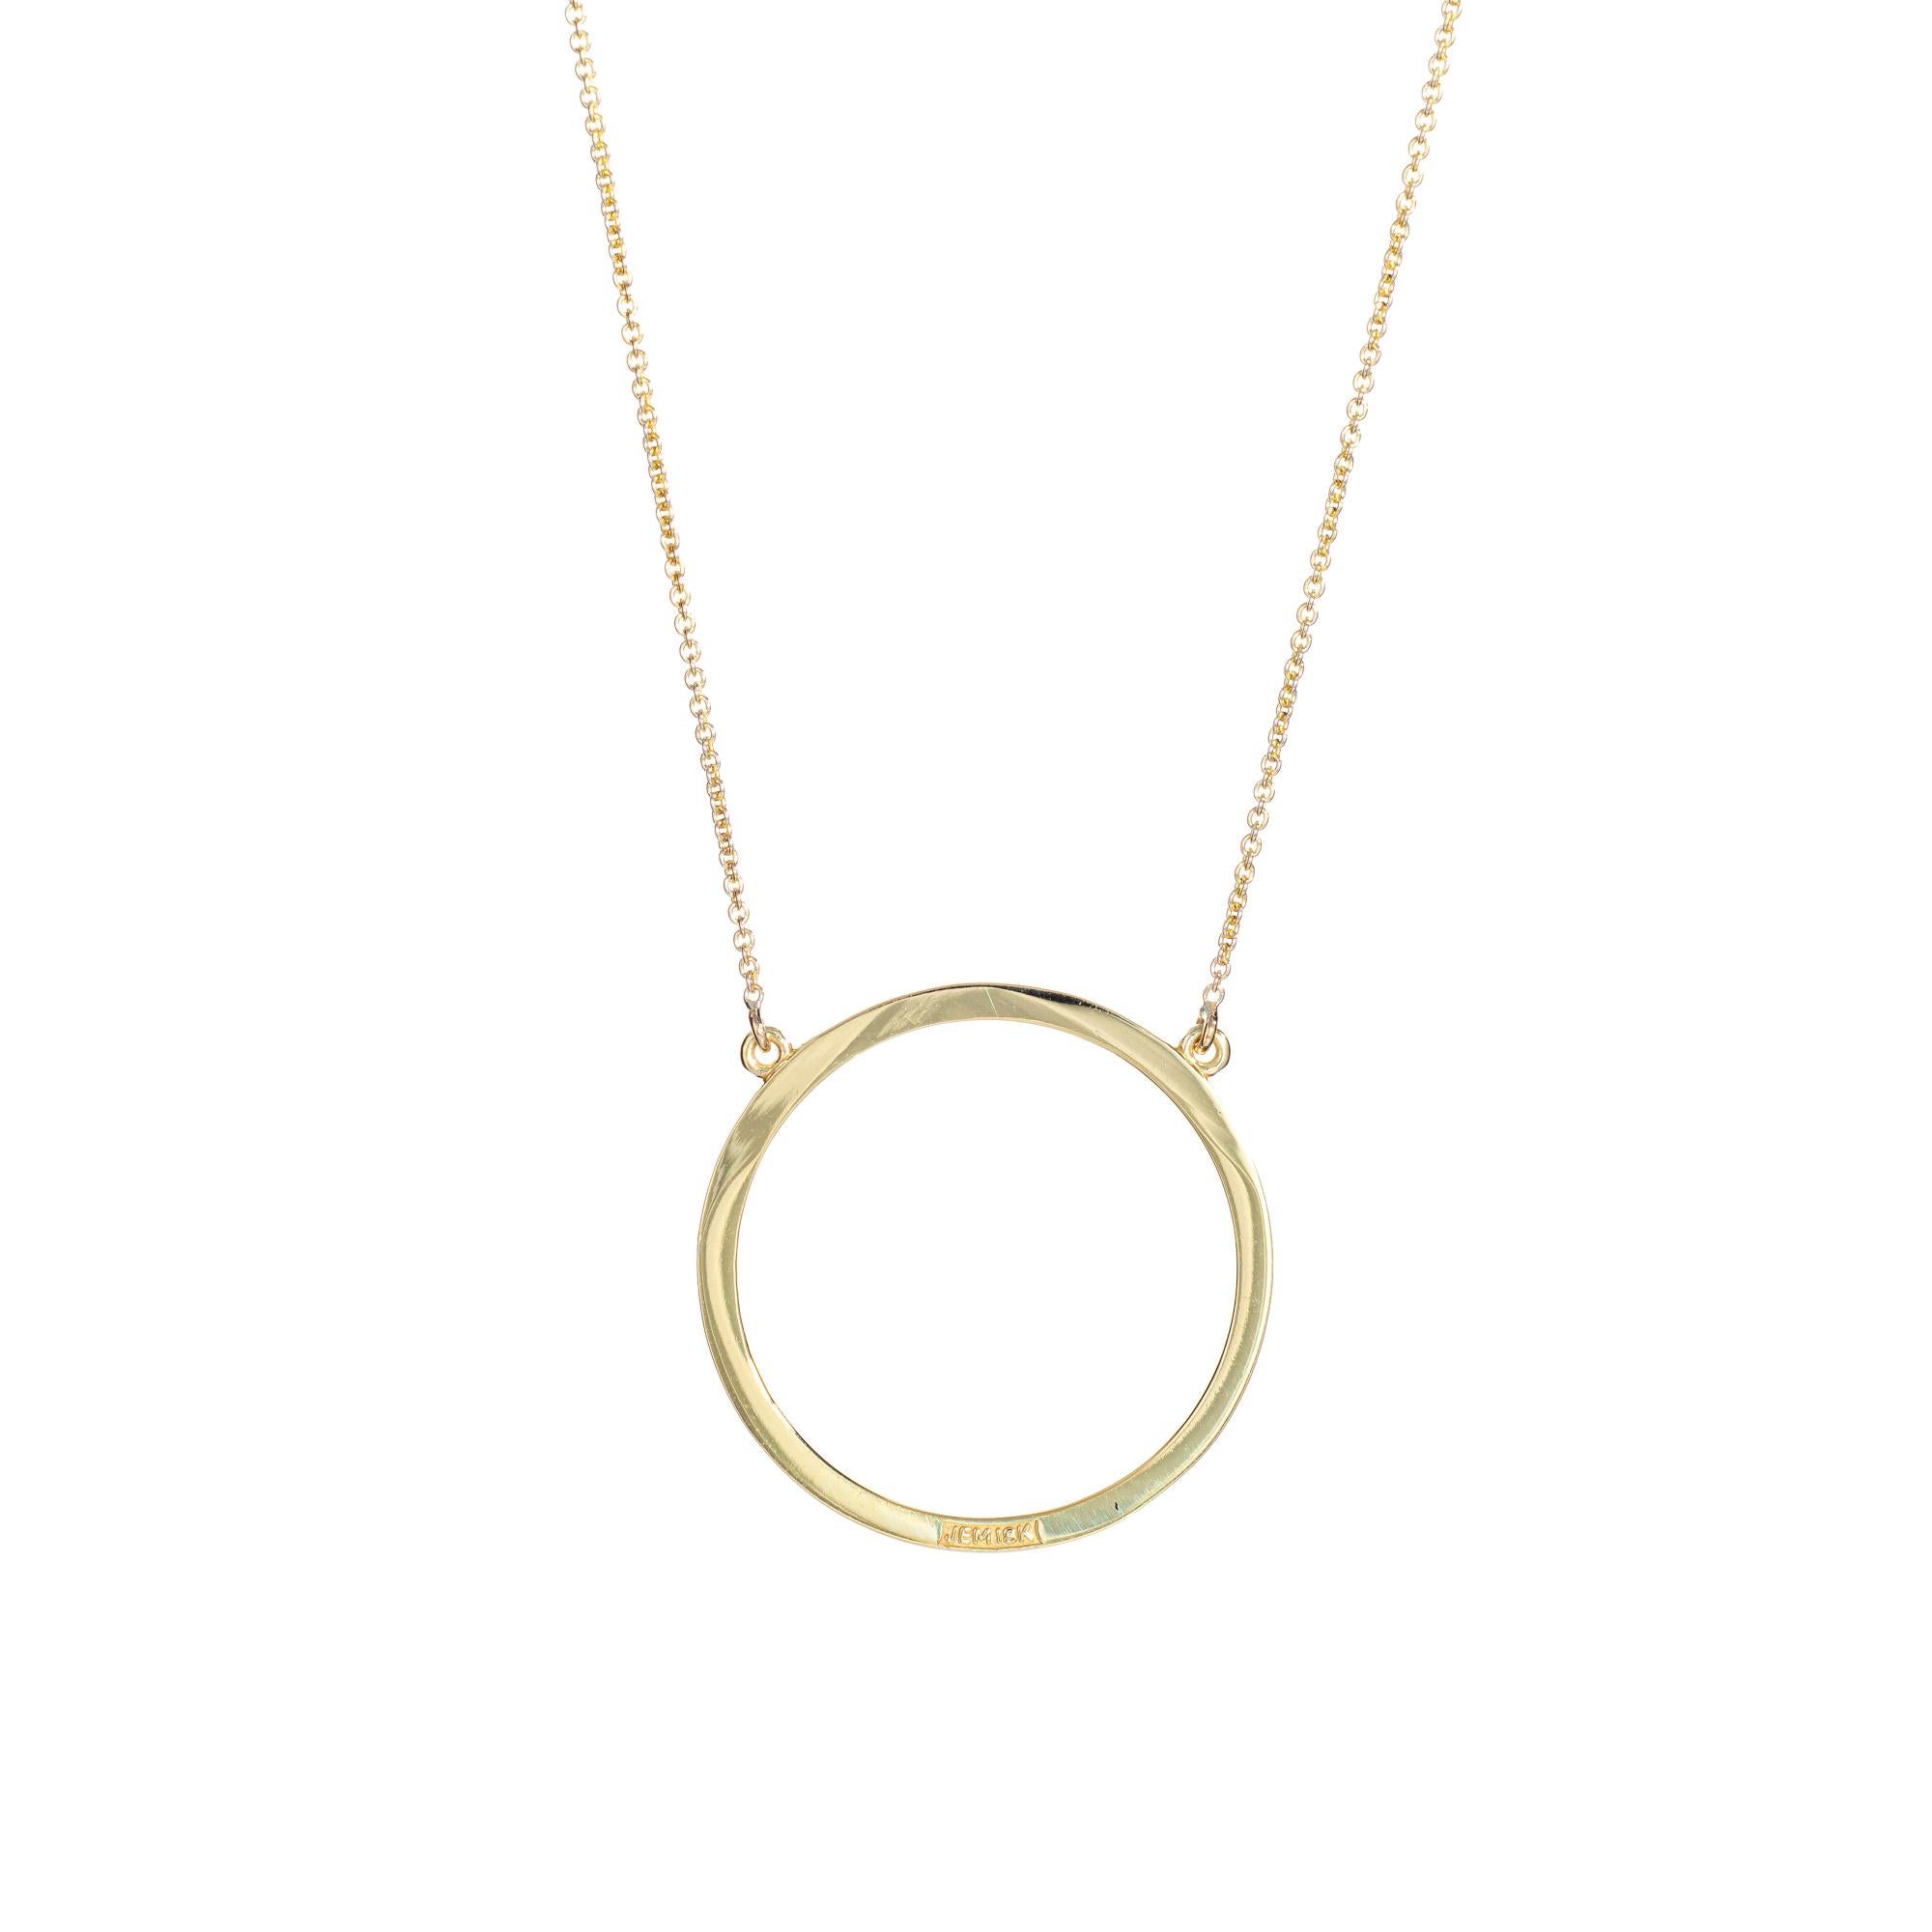 Stylish and finely detailed Jennifer Meyer Open Circle Necklace crafted in 18 karat yellow gold.

The circle pendant measures 1 inch and is attached to a fine link 17